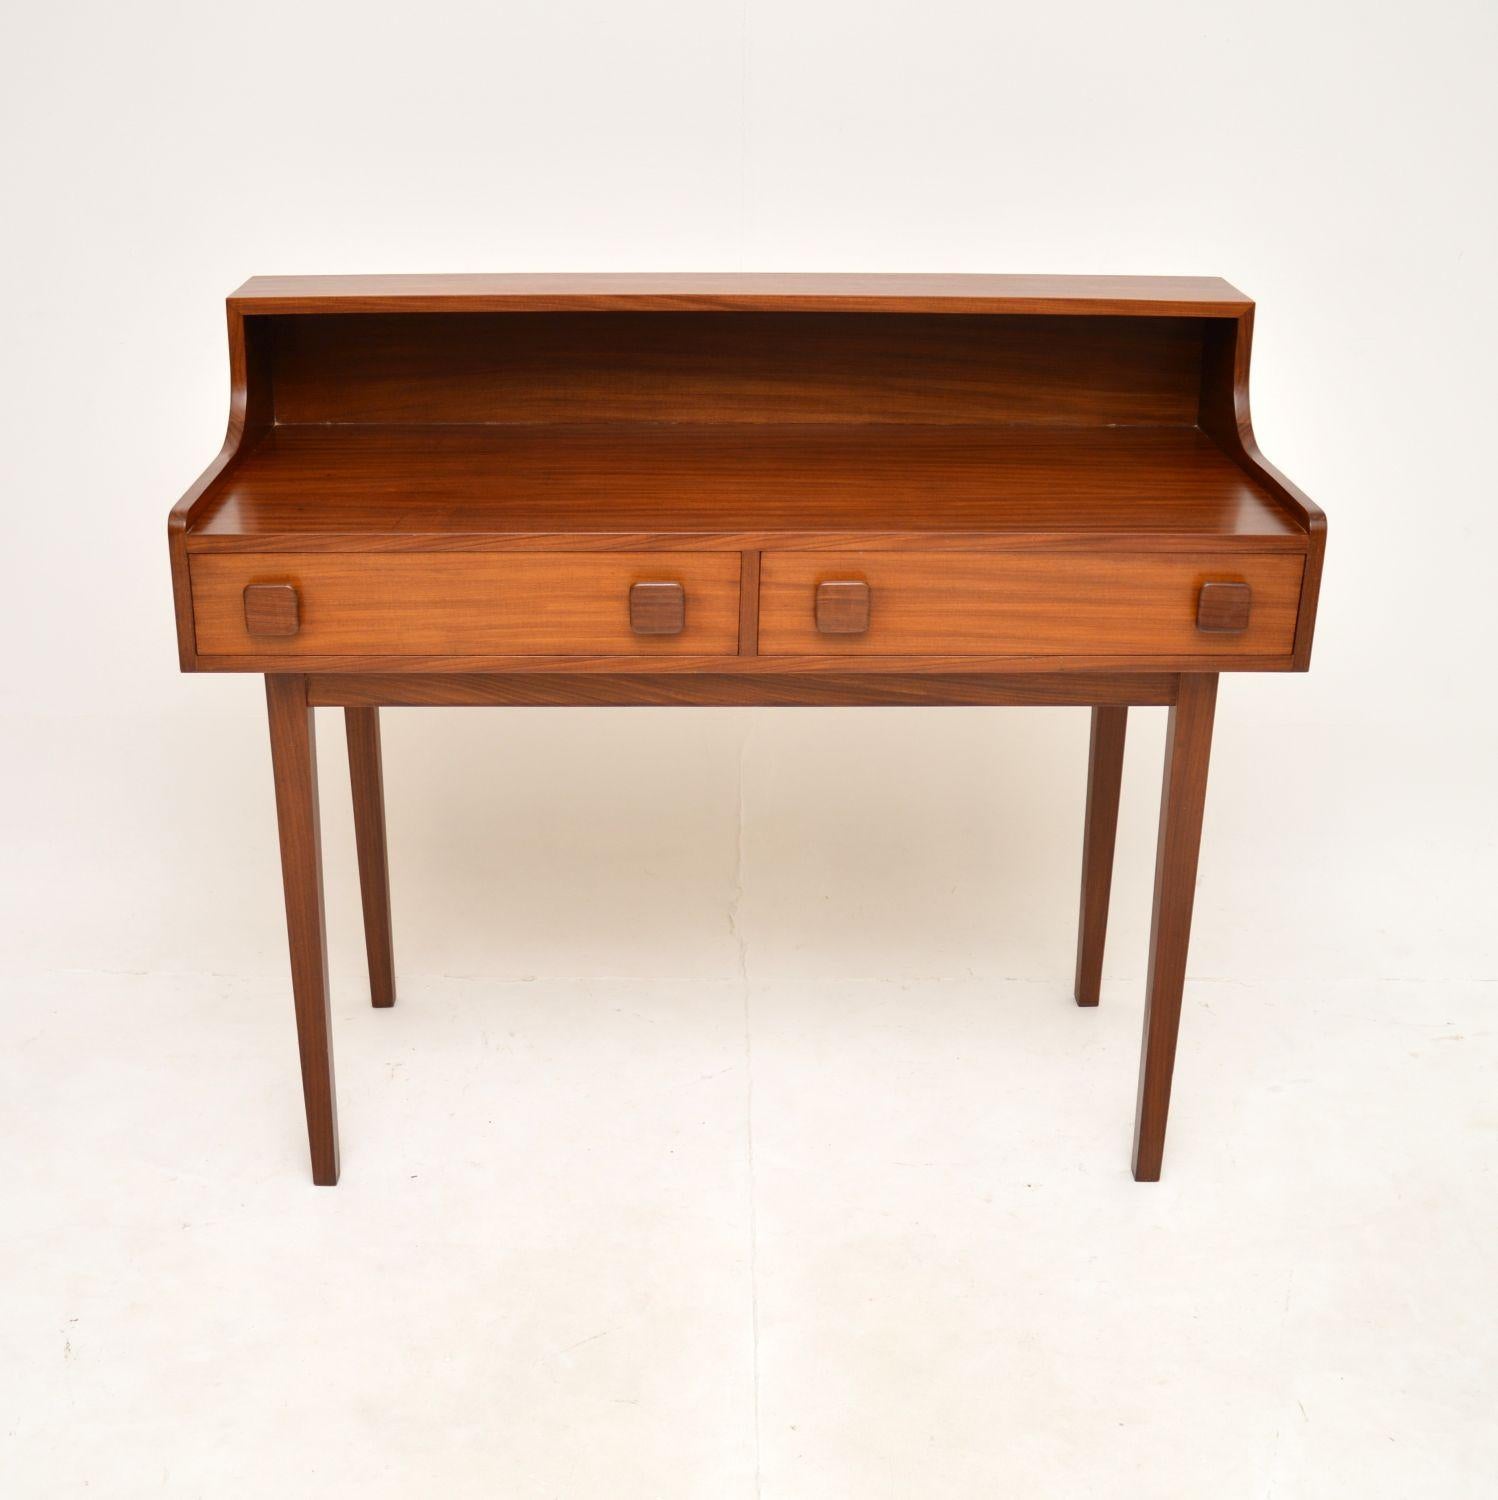 A stylish and very well made Danish teak vintage desk / writing table. This was made in Denmark, it dates from the 1960’s.

The quality is superb, this is beautifully constructed and designed, looking great from all angles. There is a useful back